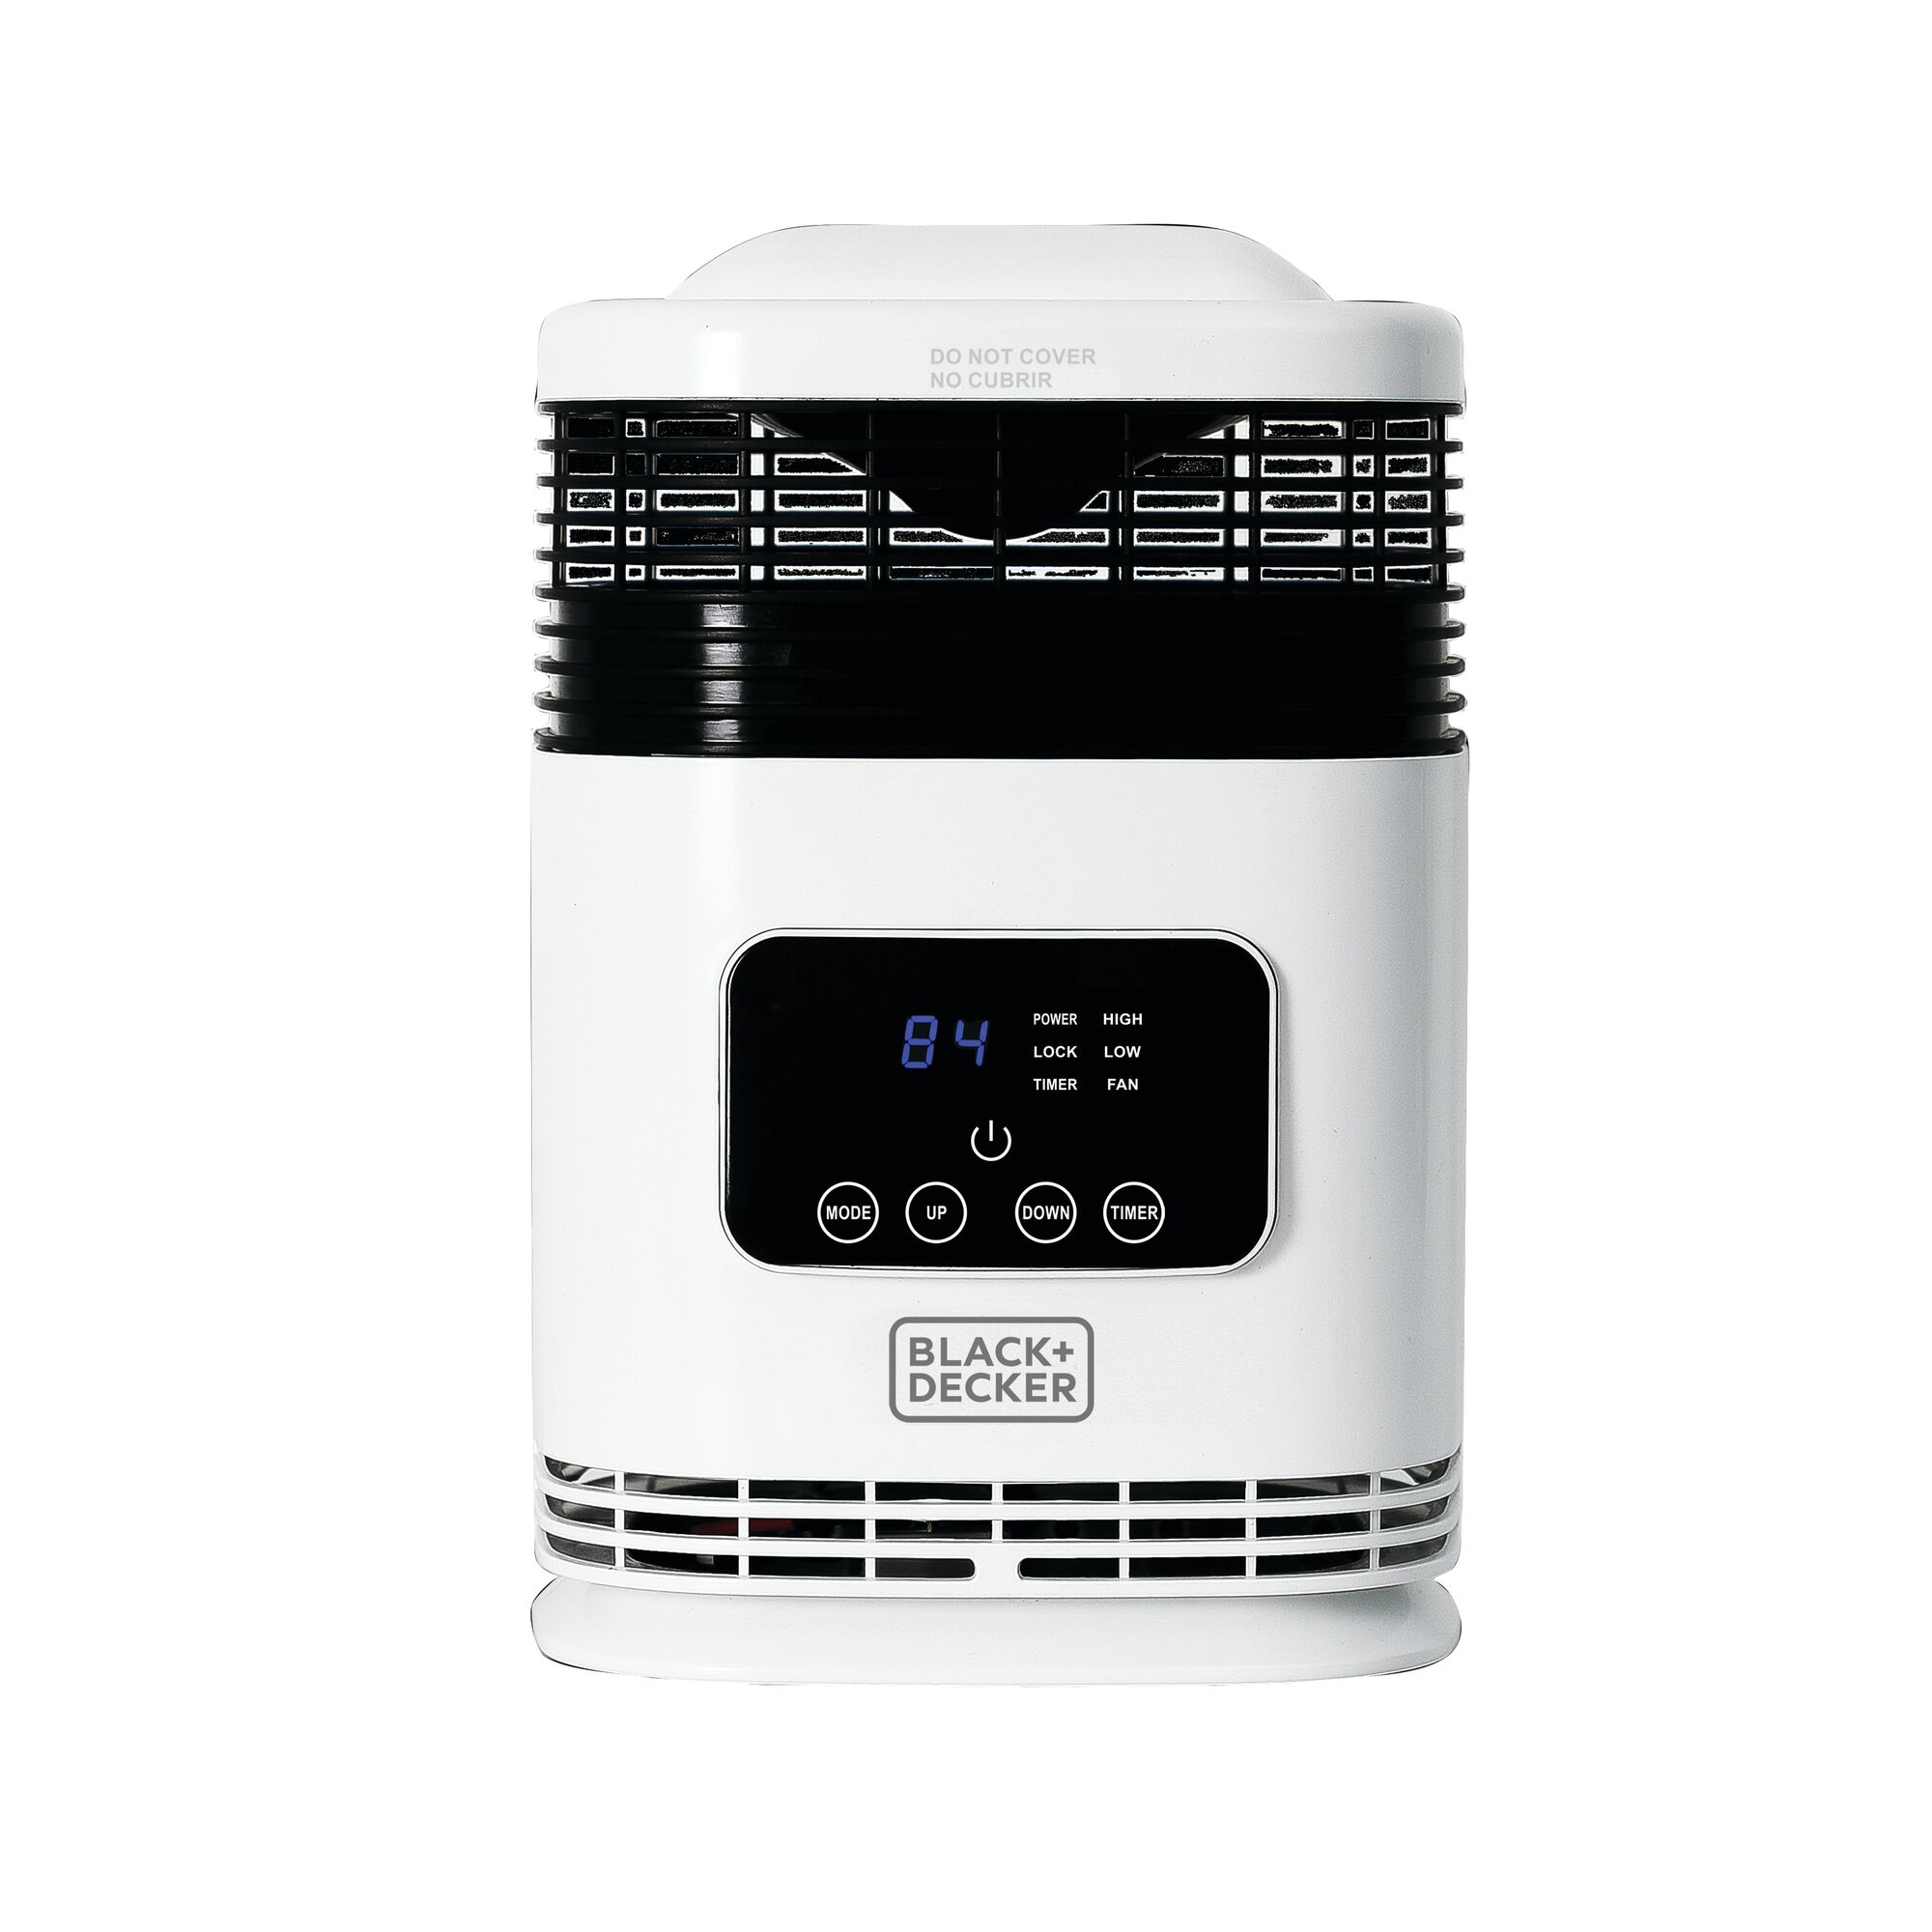 360 degree surround heater with digital display.